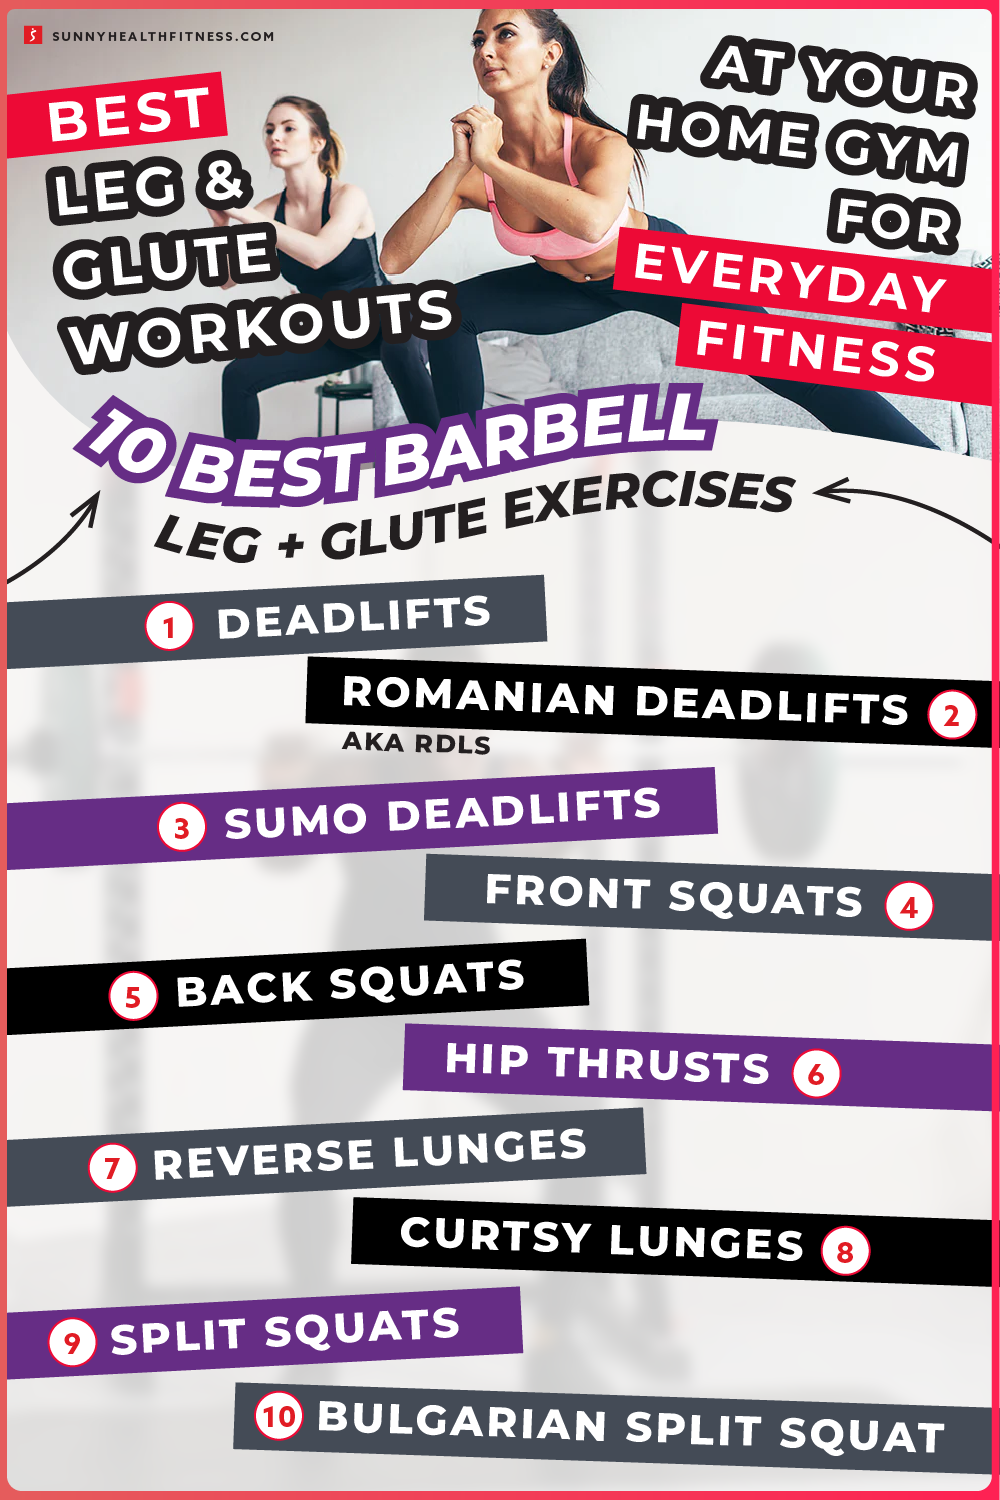 Best Leg & Glute Workouts at Your Home Gym for Everyday Fitness Best Barbell Exercises